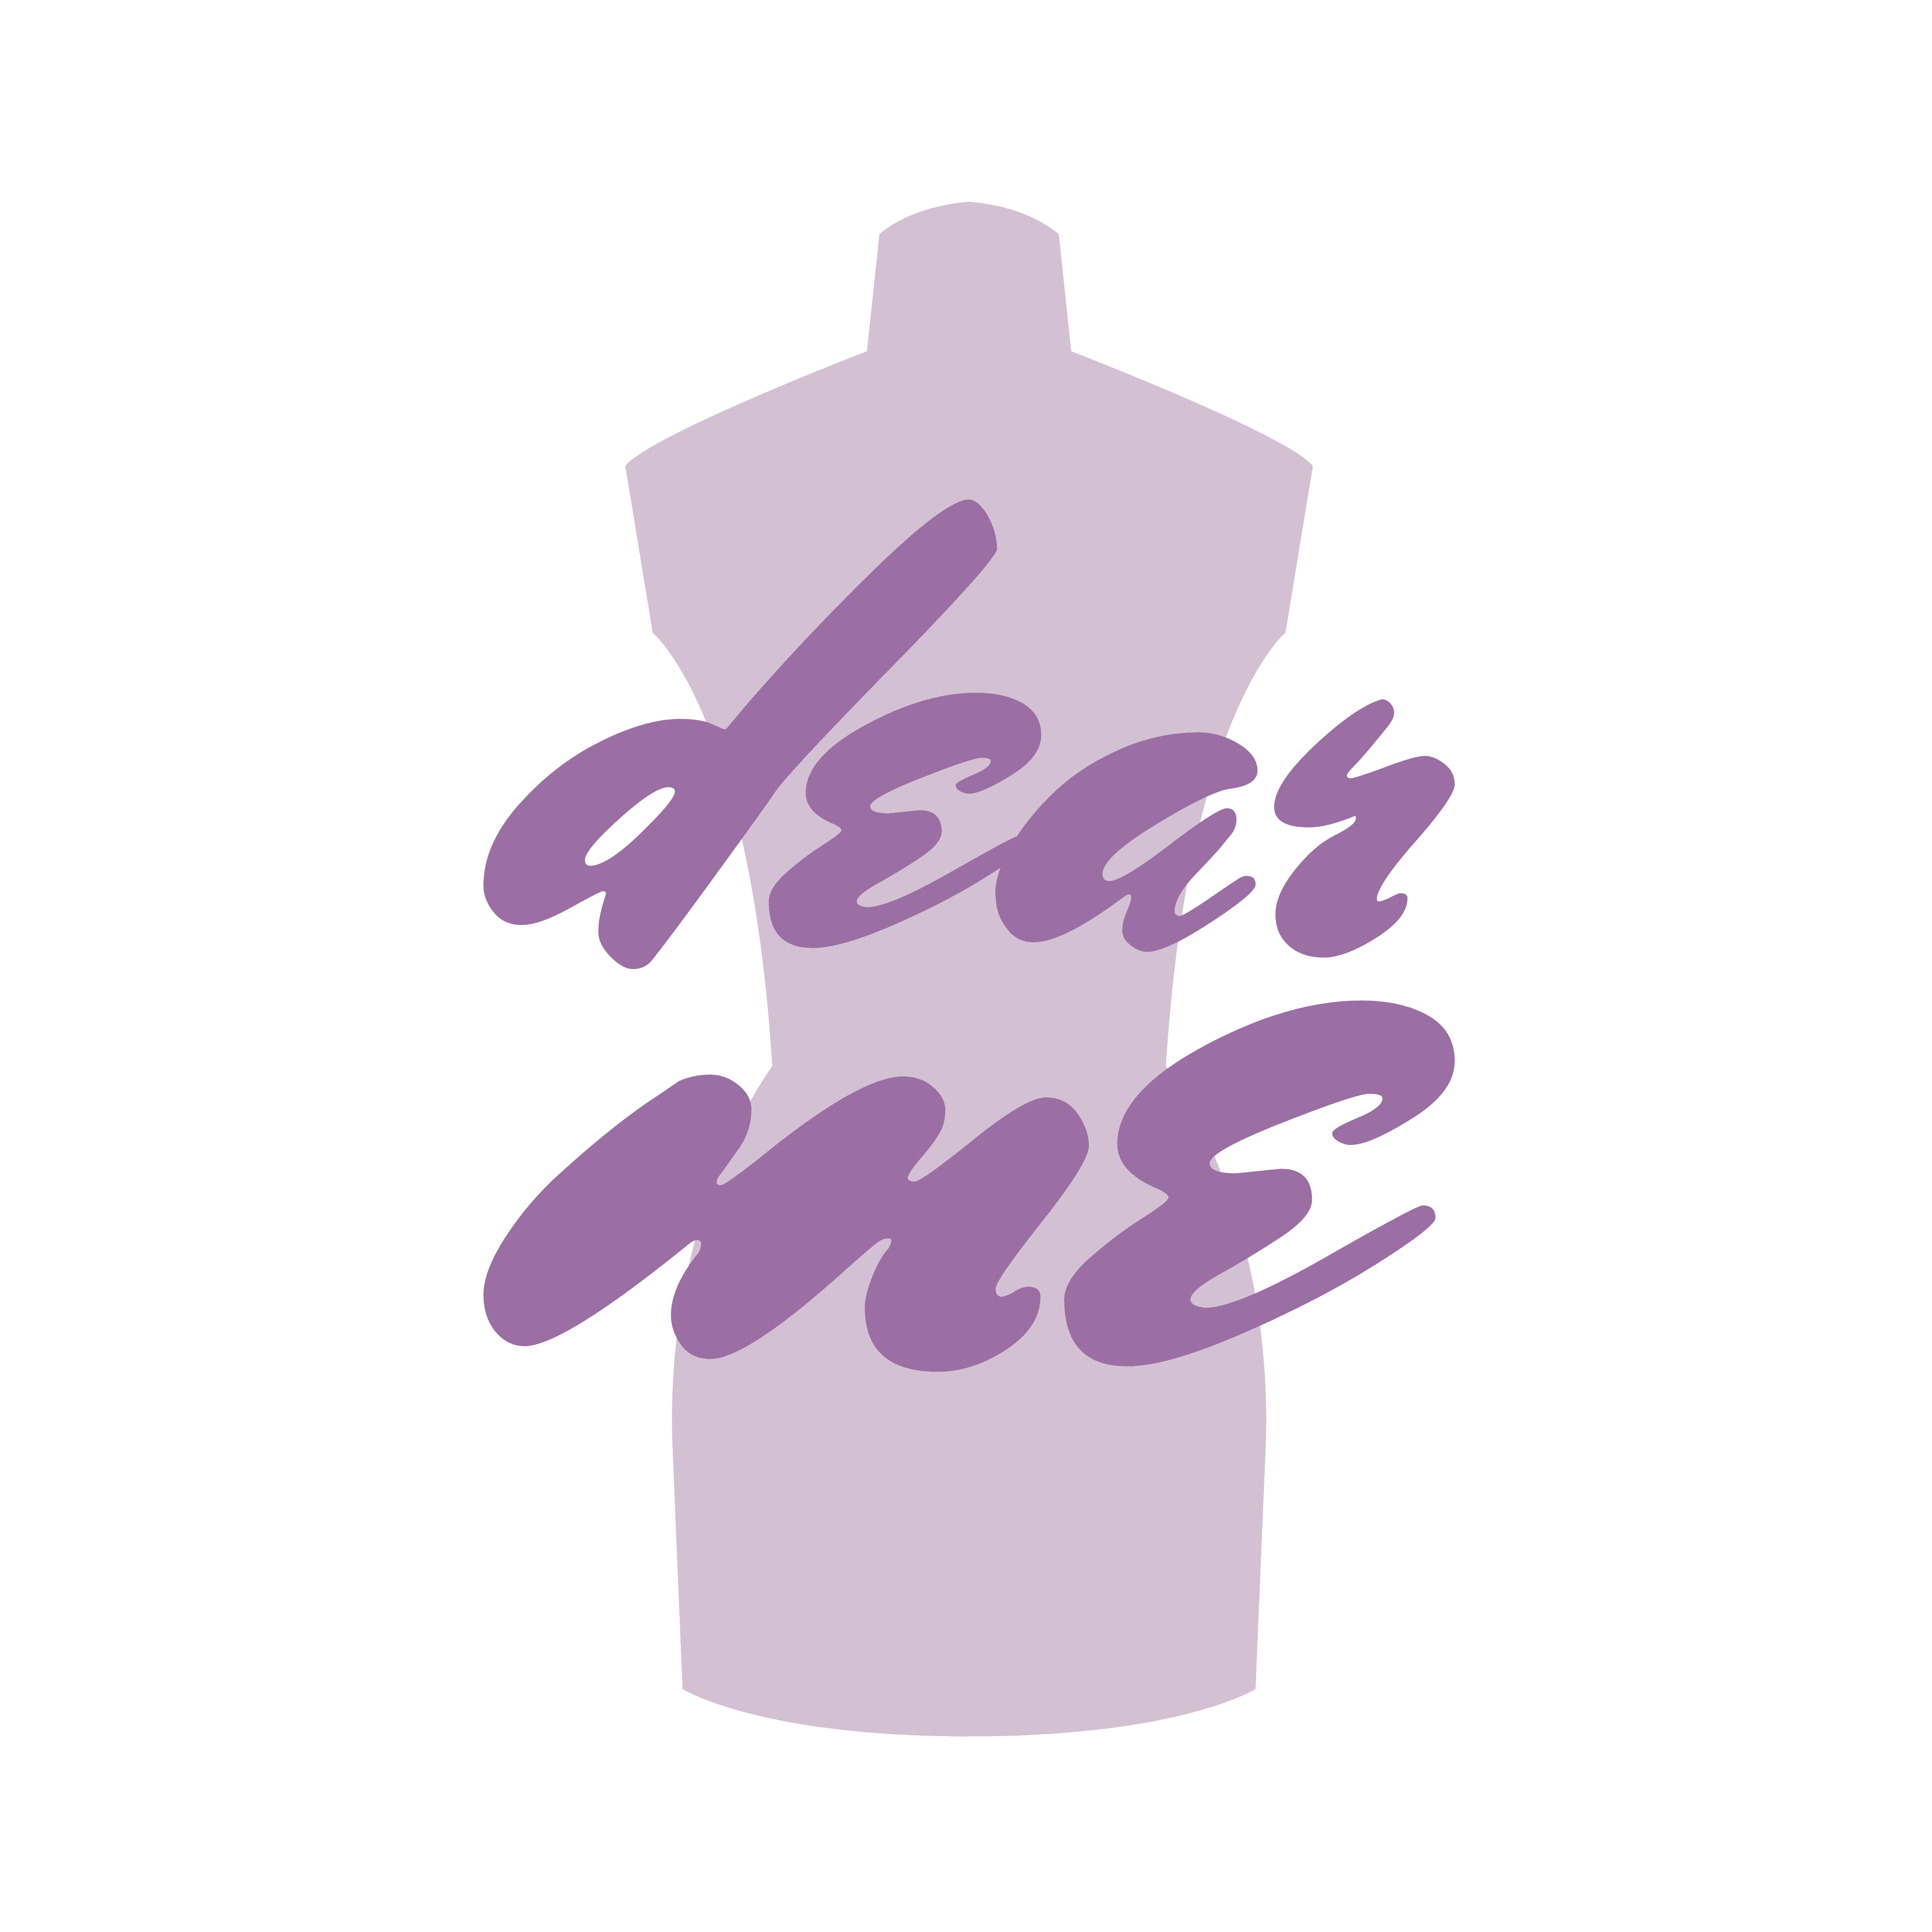 Photo shows the logo for Dear Me fashion boutique. It is a light purple mannequin shape with the words "Dear Me" imposed on top of the shape in a dark purple, heavy script font.